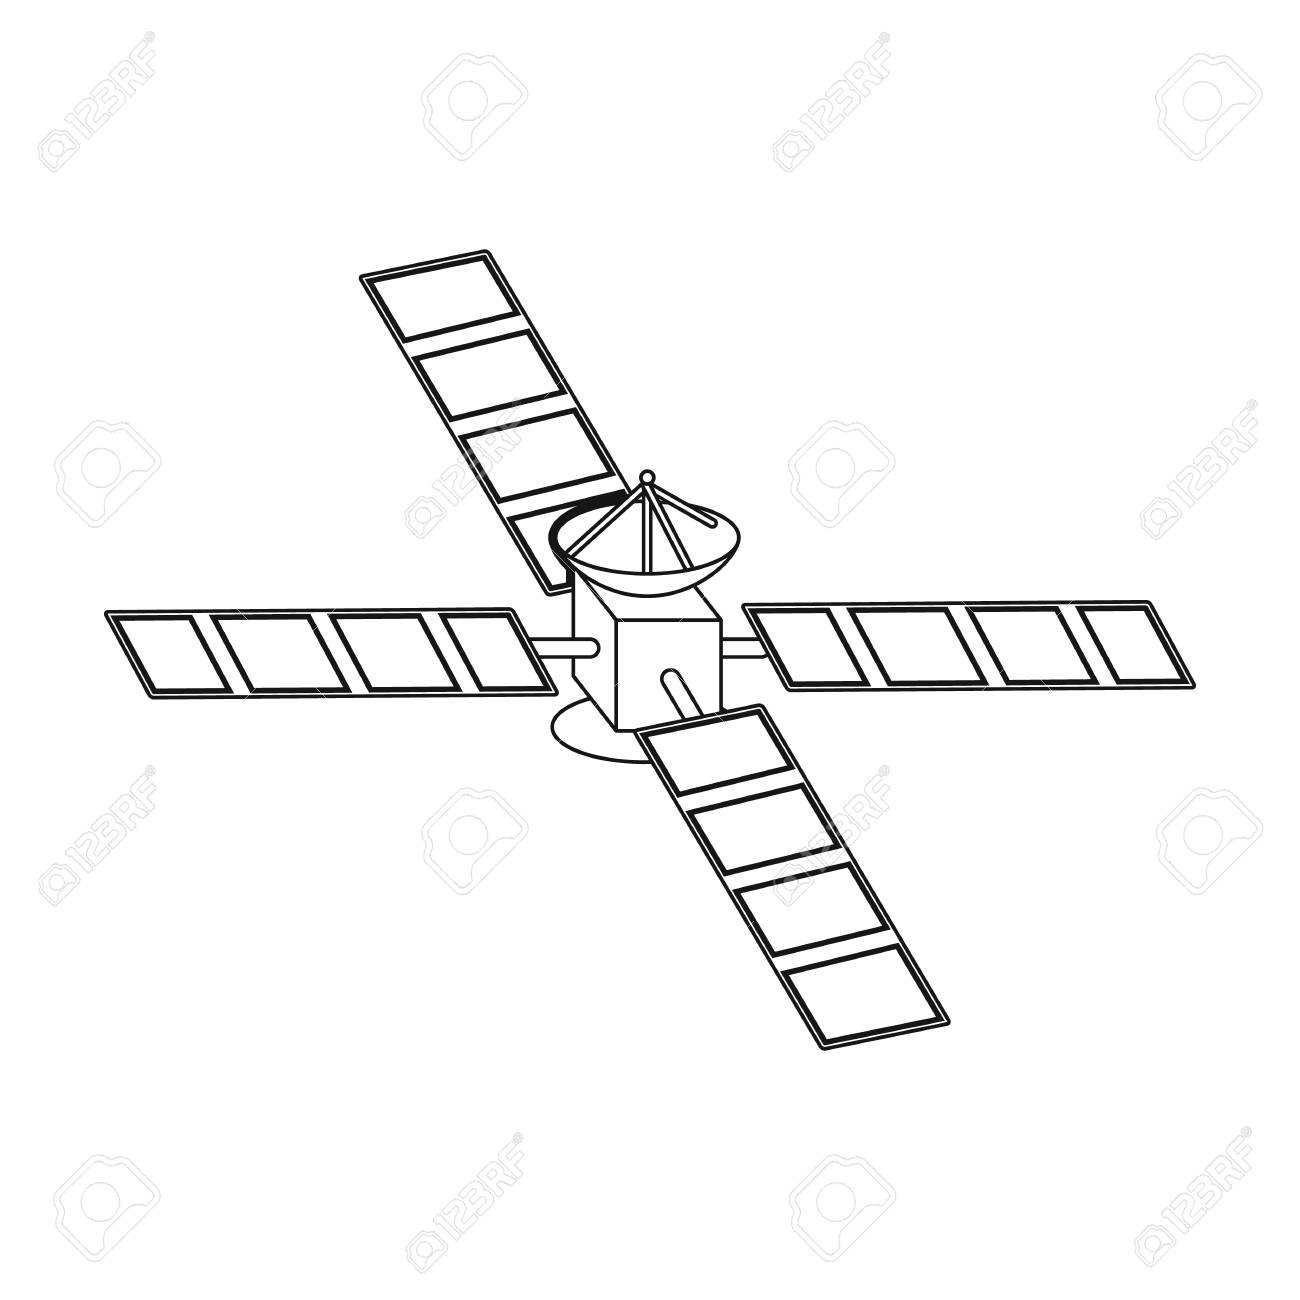 Space Station Drawing at GetDrawings Free download